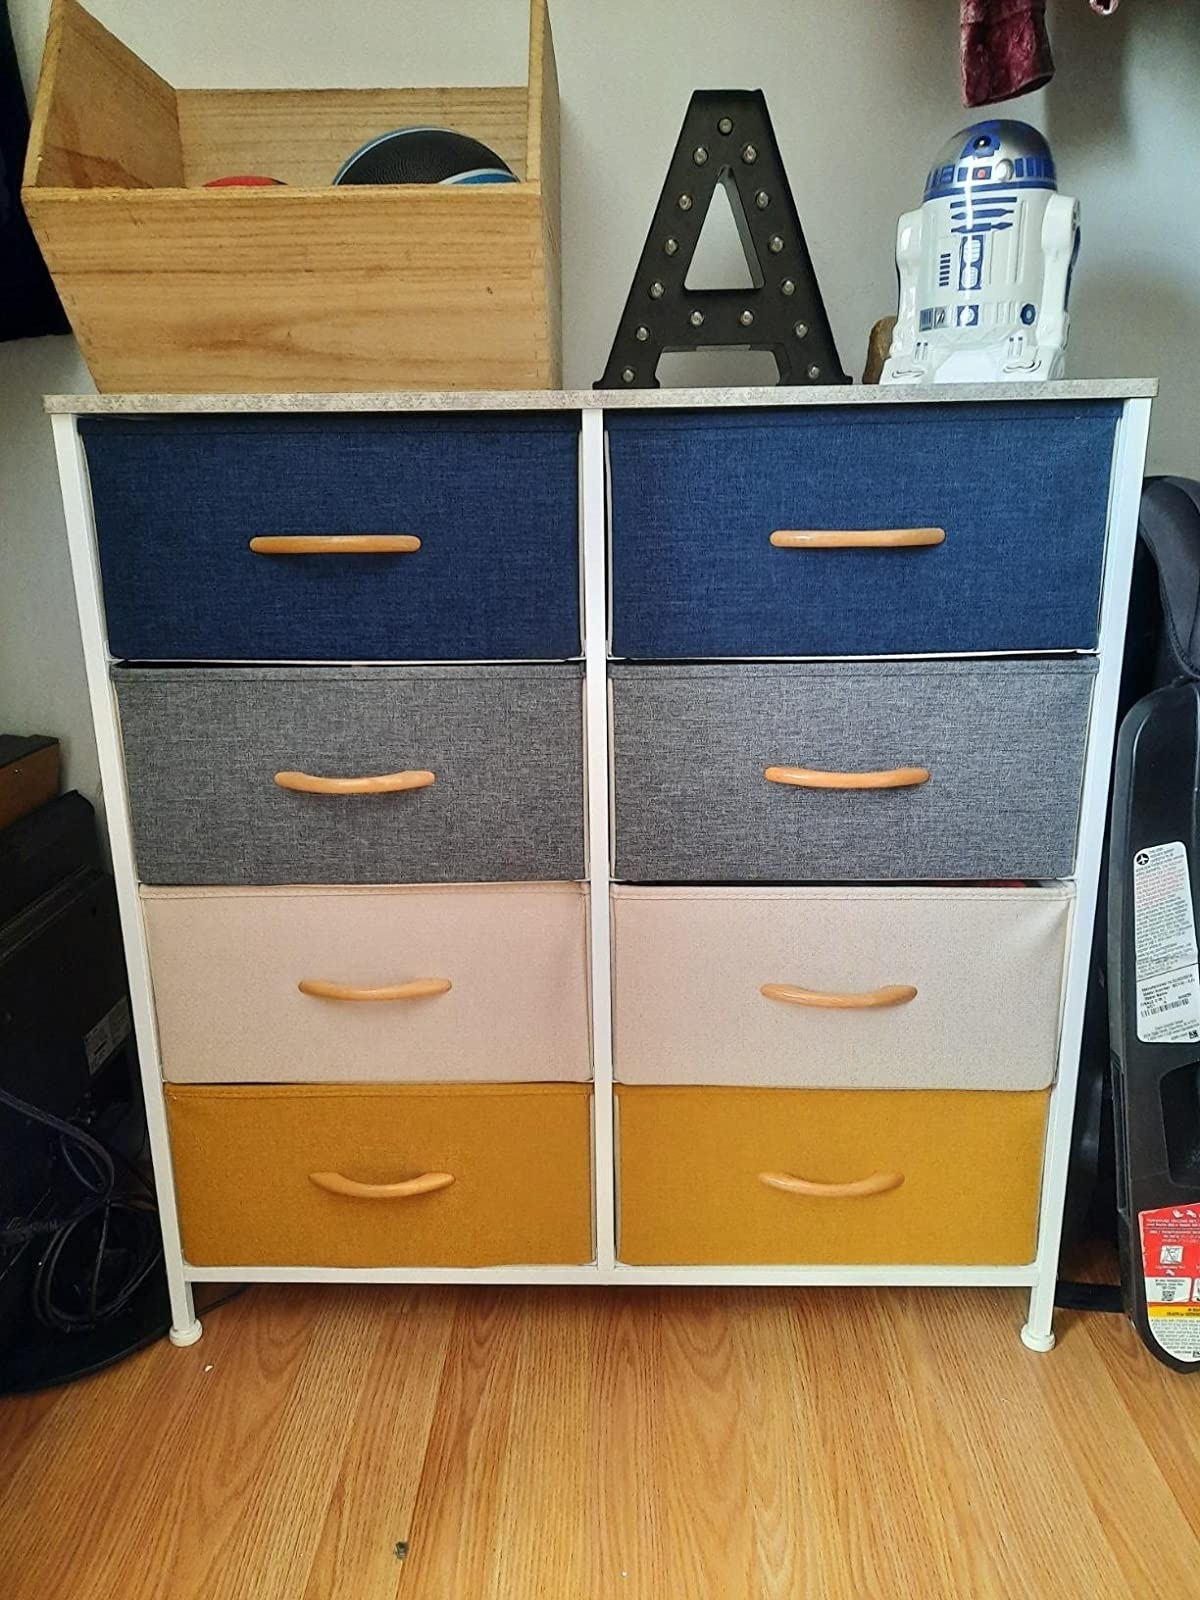 The dresser with eight drawers of different colors with wooden handles